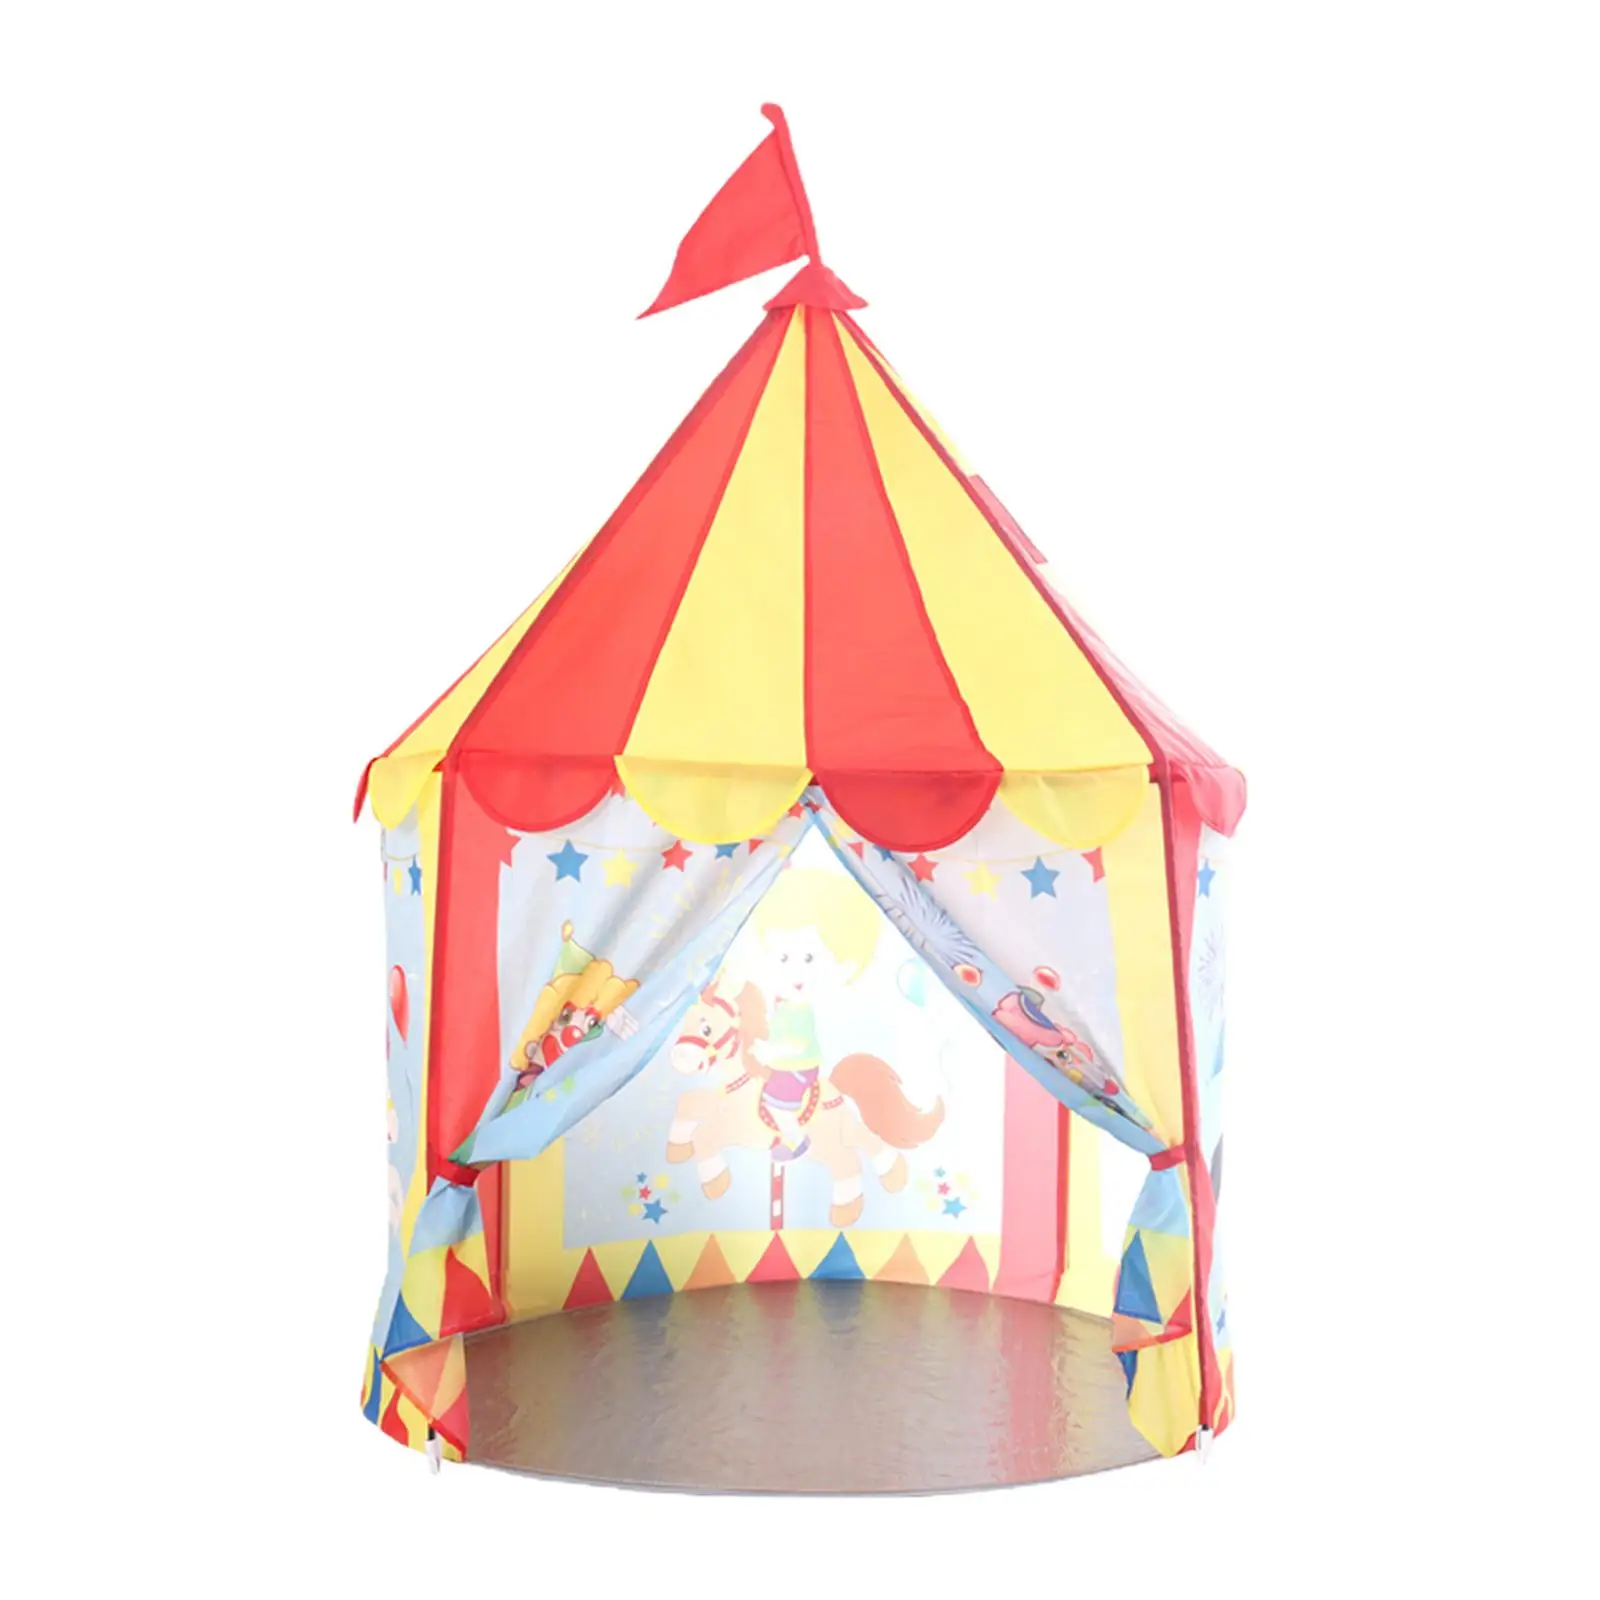 Play Tent House for Boys Girls Easy to Assemble Foldable Birthday Gift Kids Playhouse for Games camping home